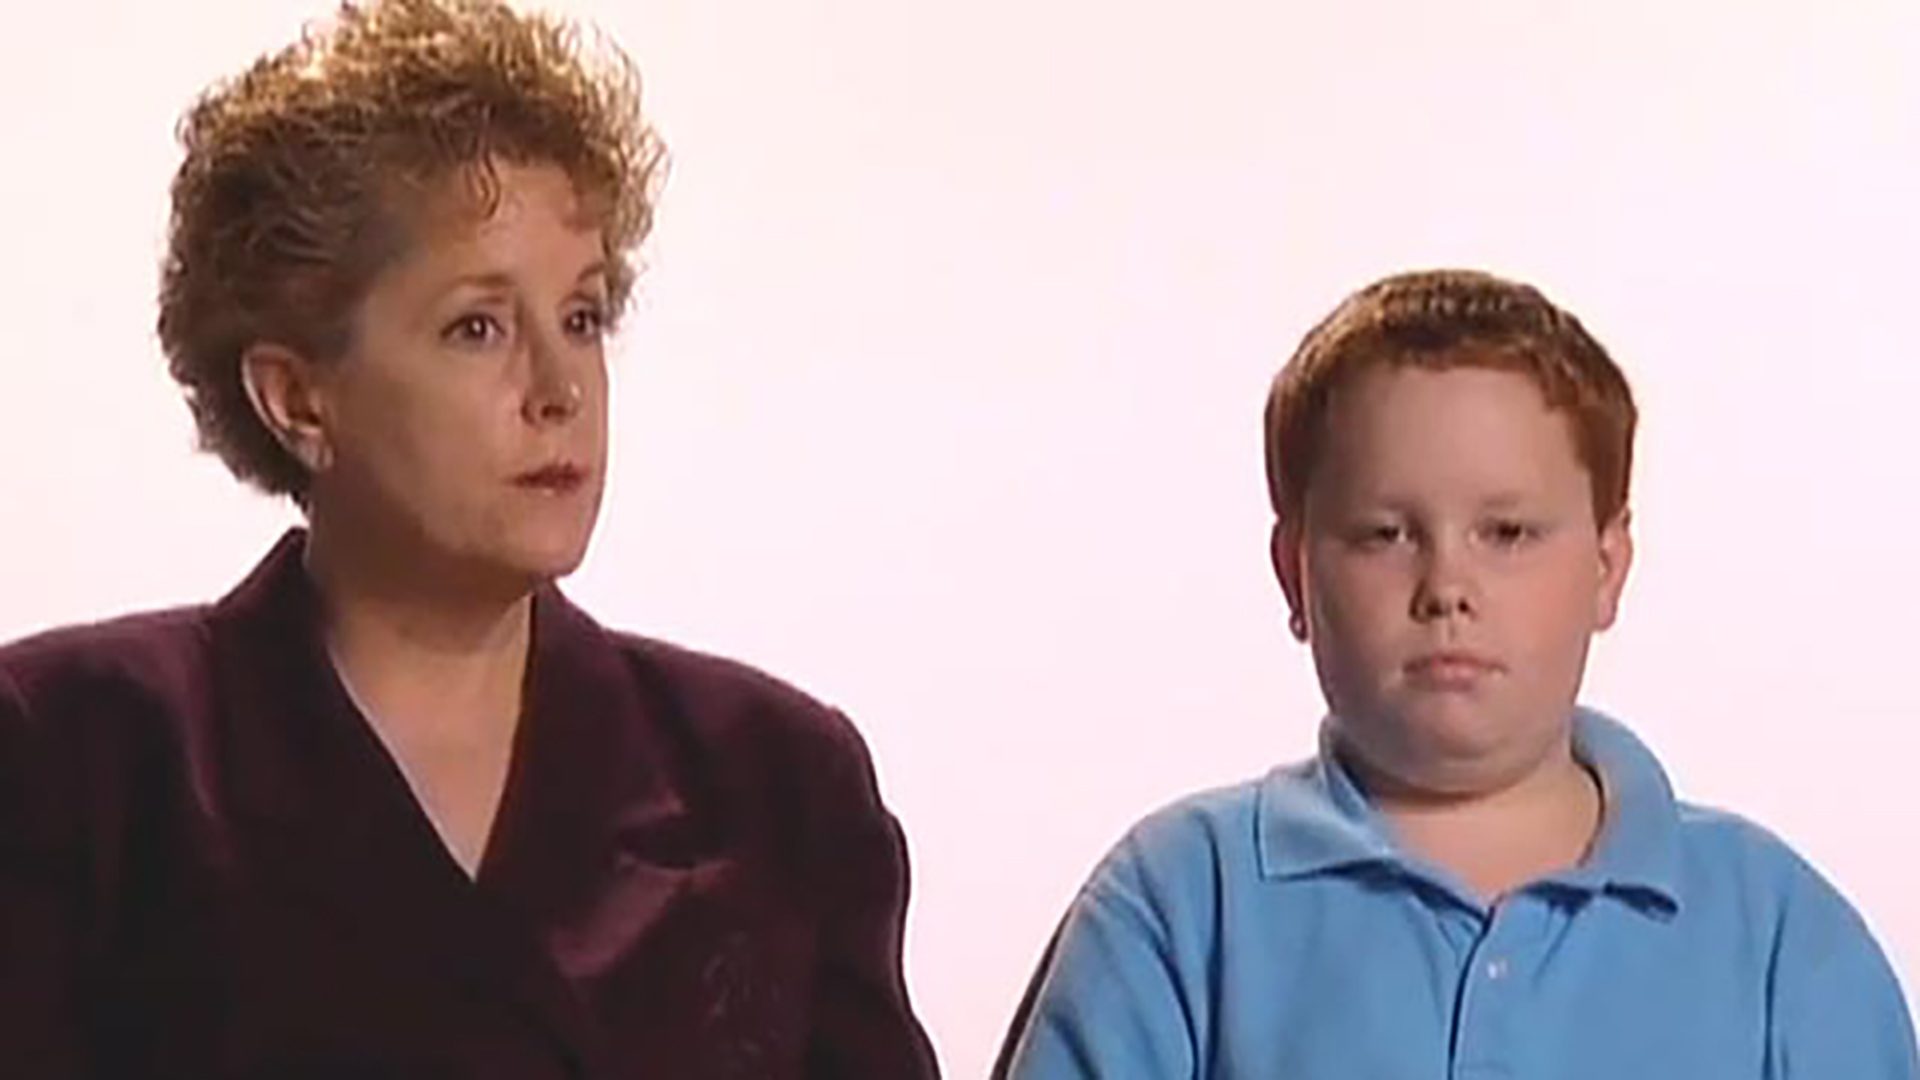 A woman in a burgundy suit jacket and a young boy in a light blue polo shirt are interviewed against a white background.